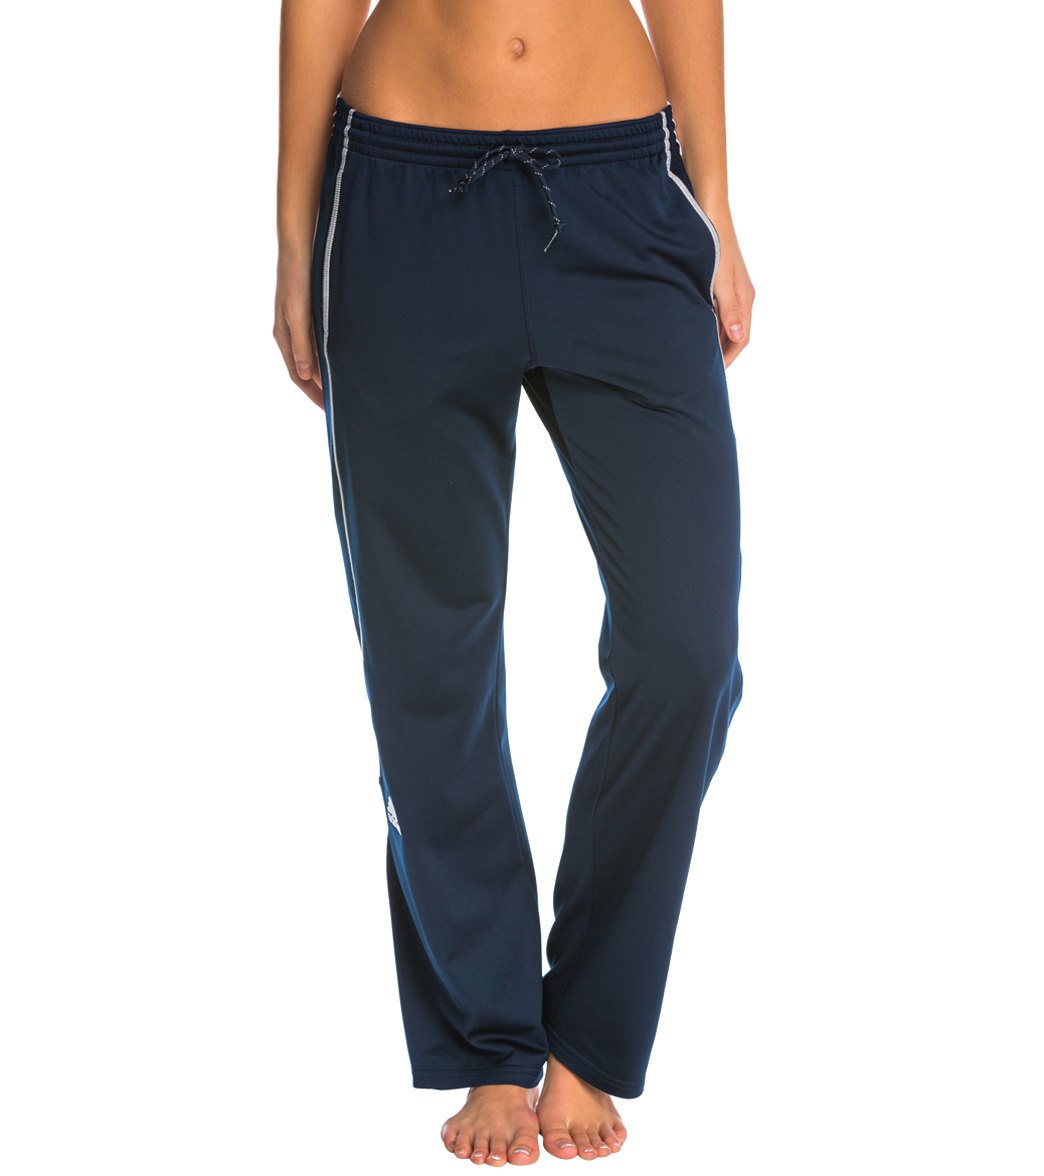 Adidas Women's Utility Warm Up Pants - Navy X-Small Polyester - Swimoutlet.com